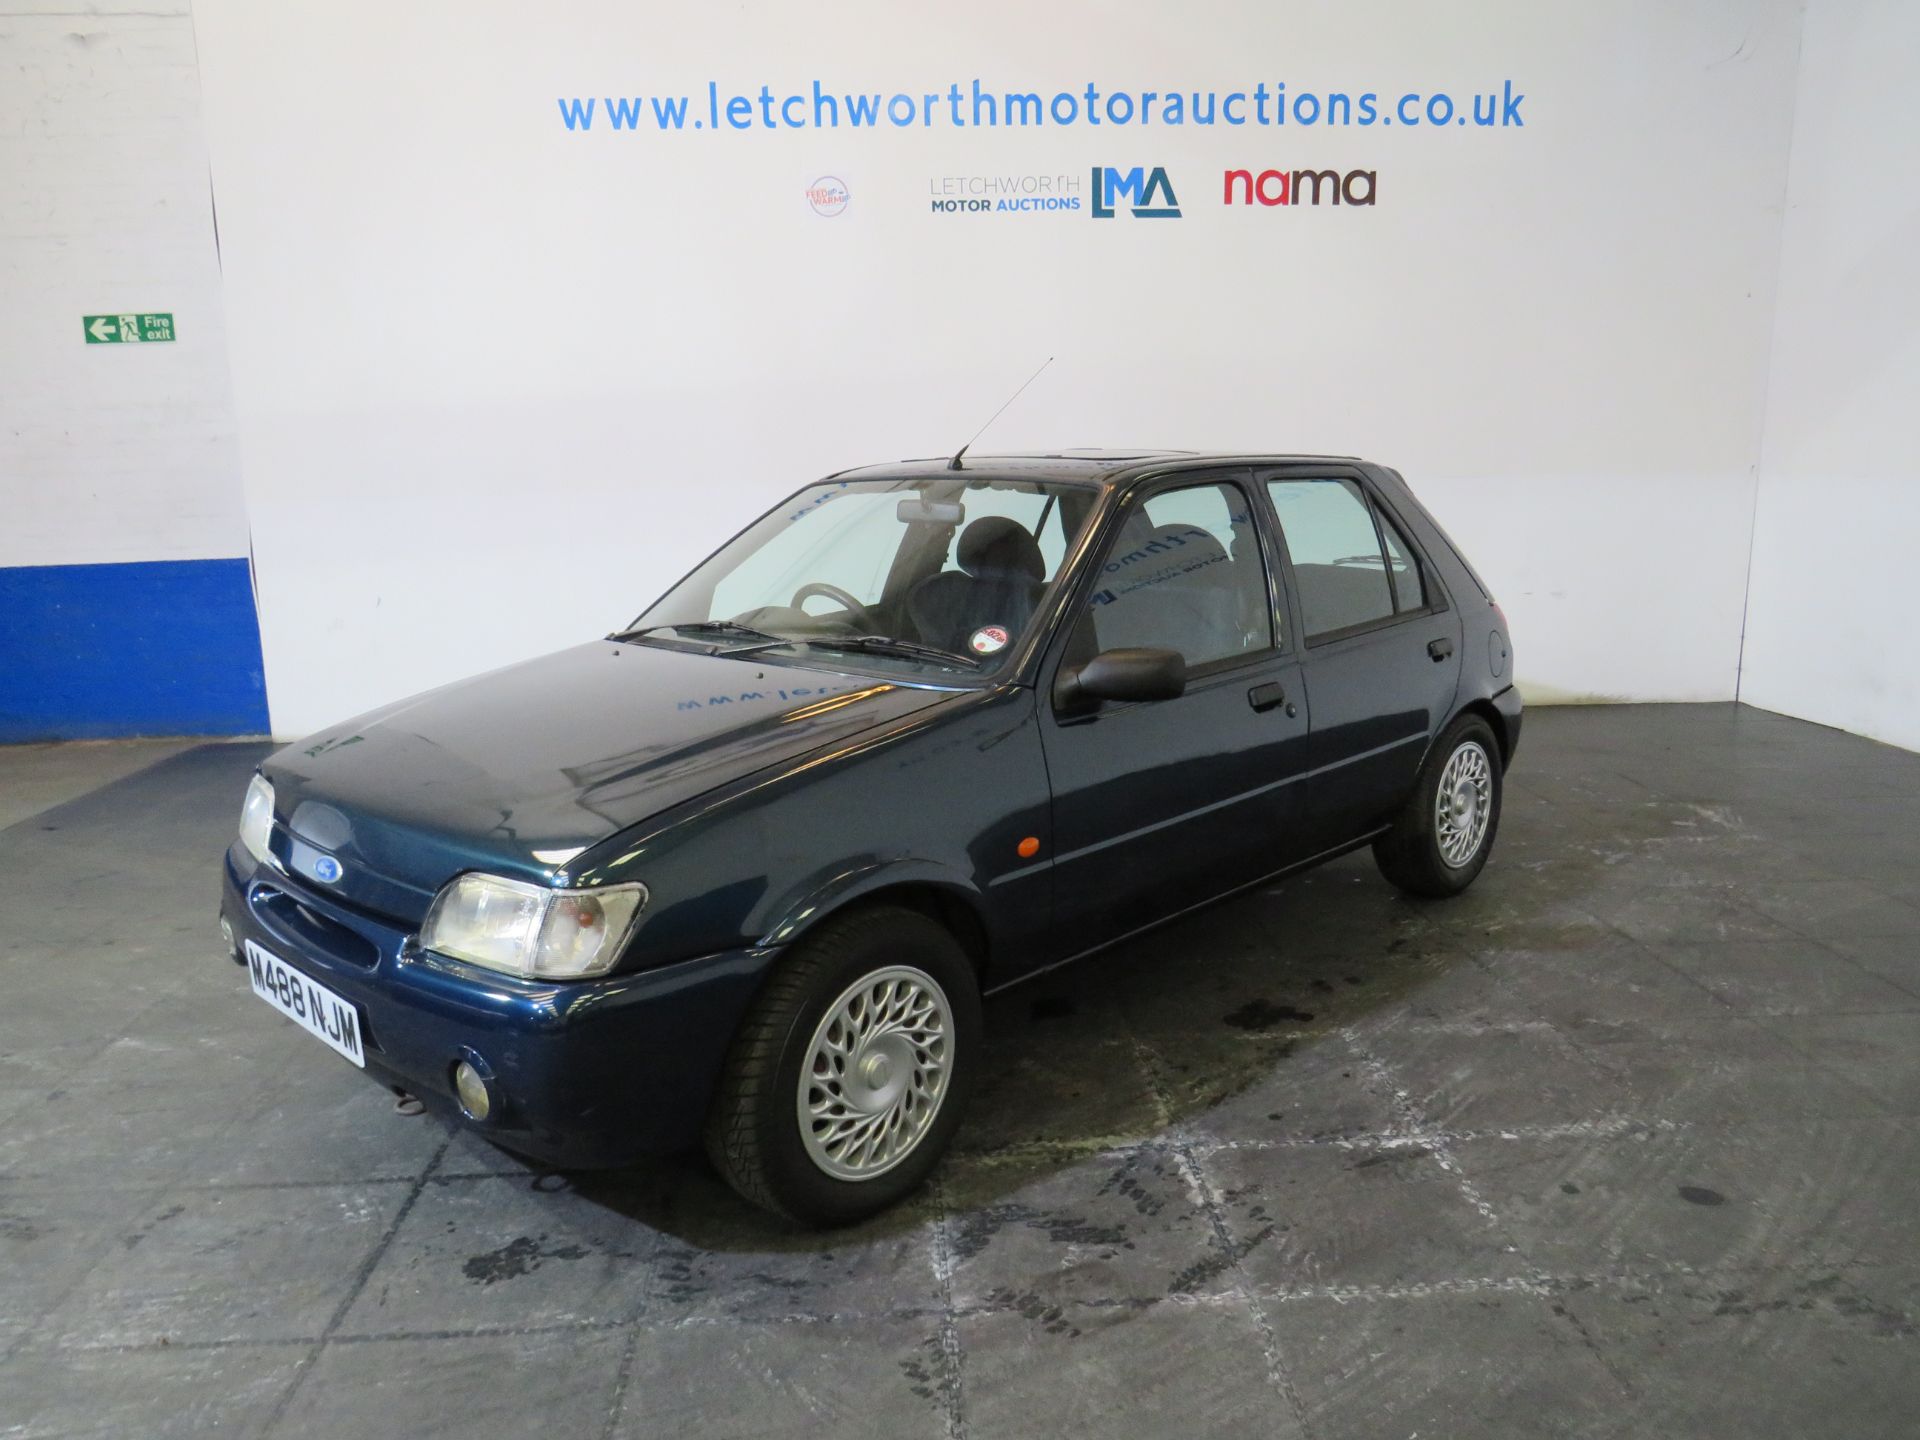 1994 Ford Fiesta SI - 1597cc - Image 3 of 19